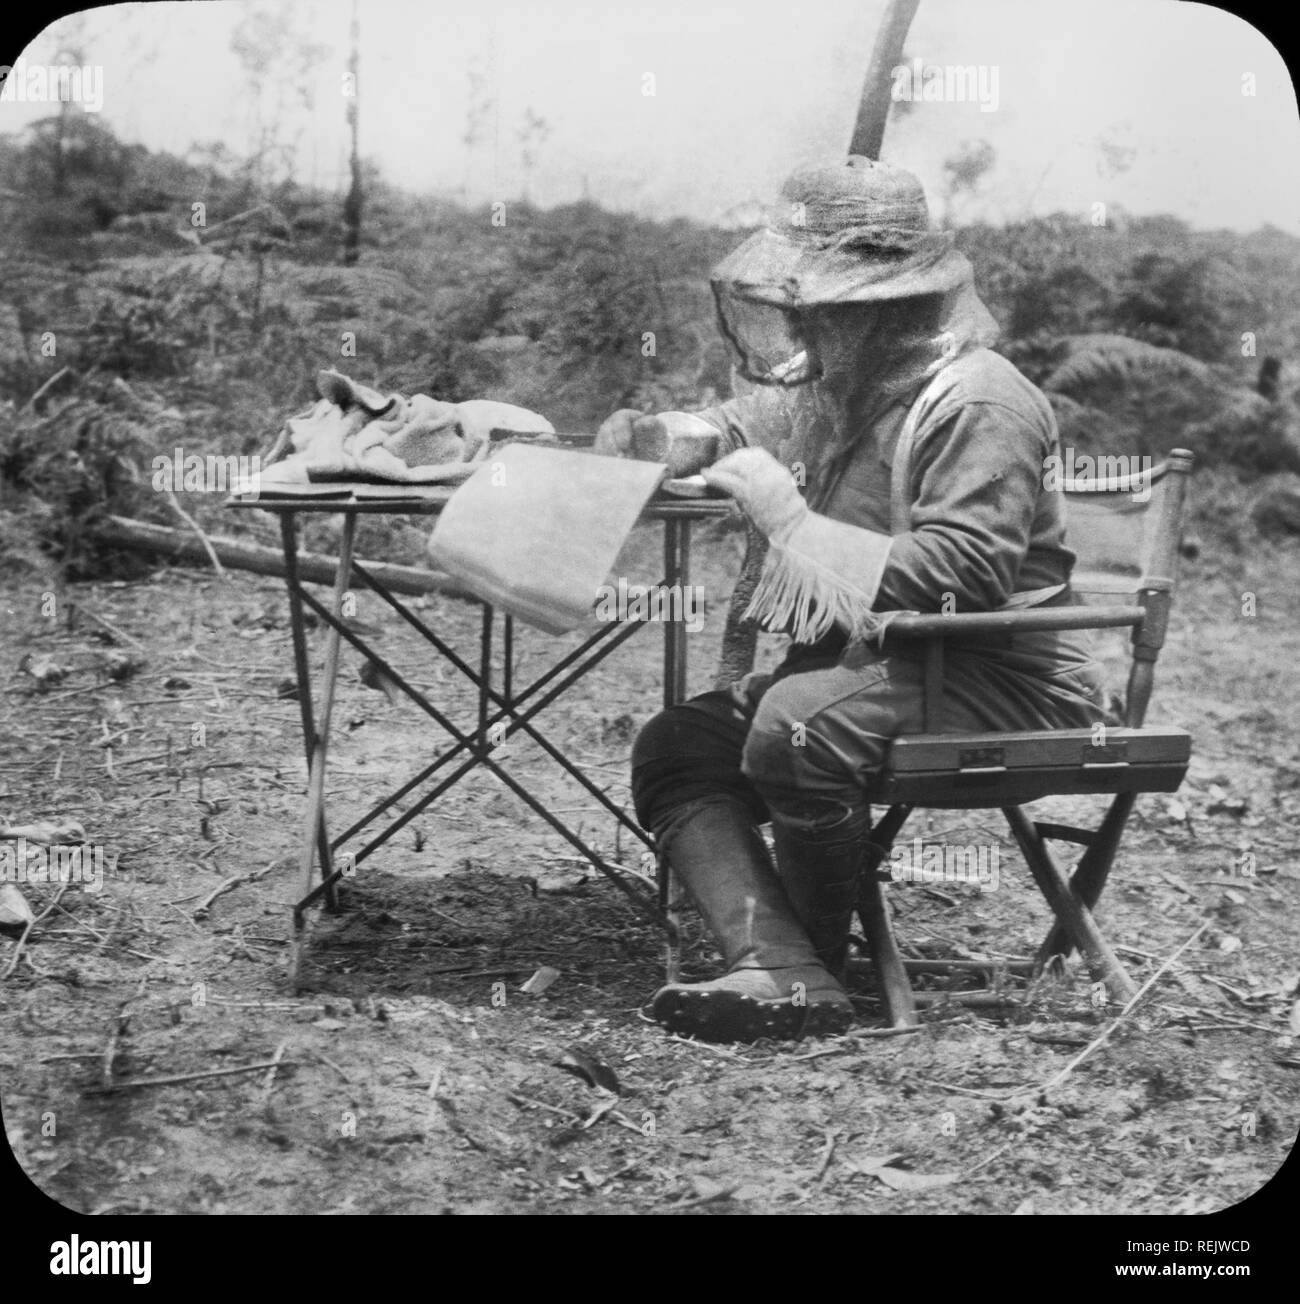 Theodore Roosevelt, Seated at Folding Table, Writing during Roosevelt-Rondon Scientific Expedition, Brazil, December 1913 Stock Photo